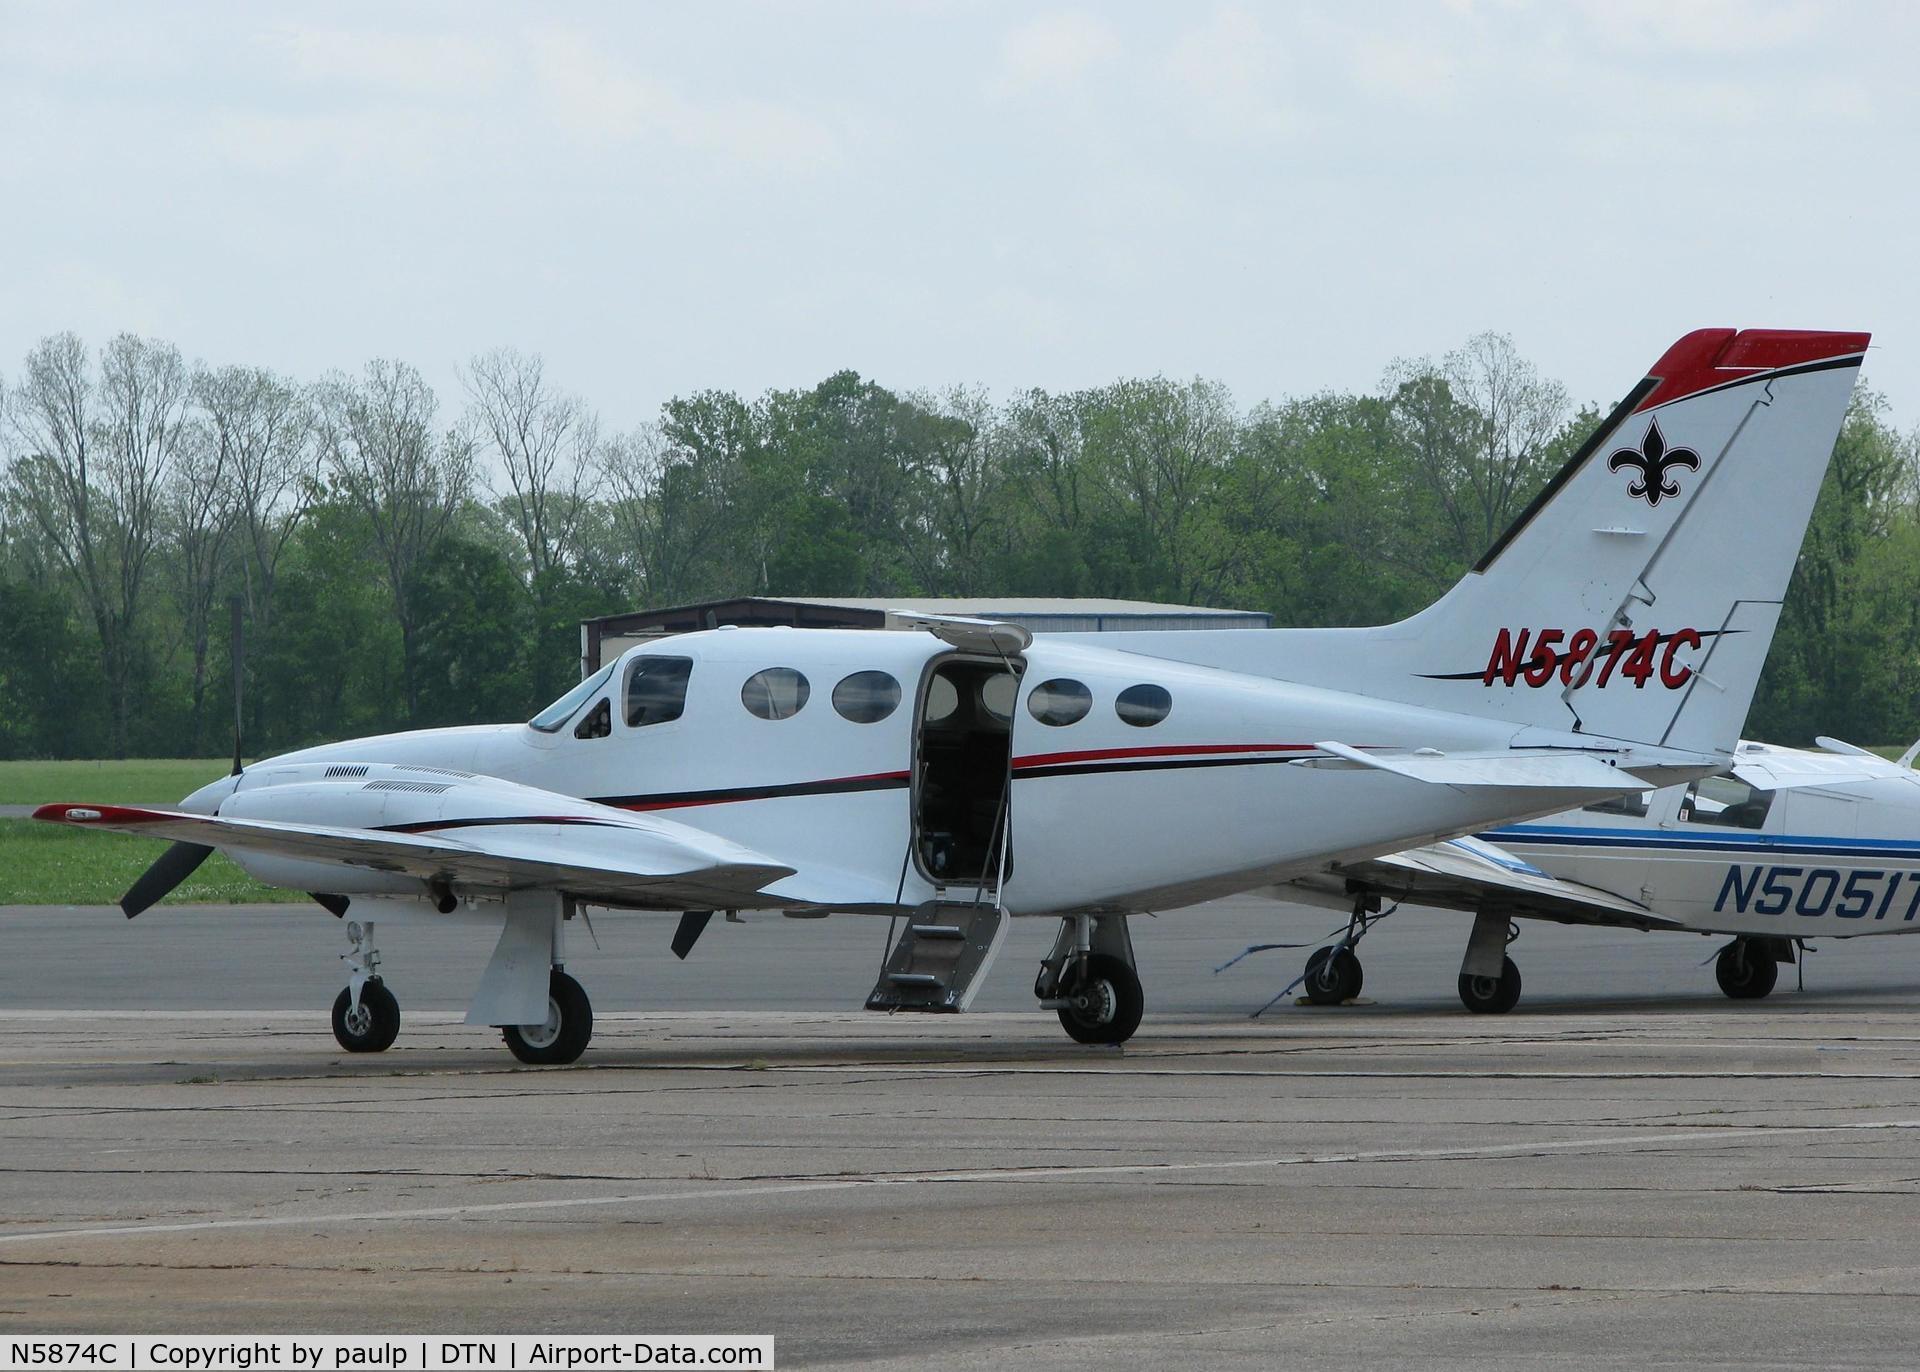 N5874C, Cessna 421C Golden Eagle C/N 421C0882, Parked at the Shreveport Downtown airport.